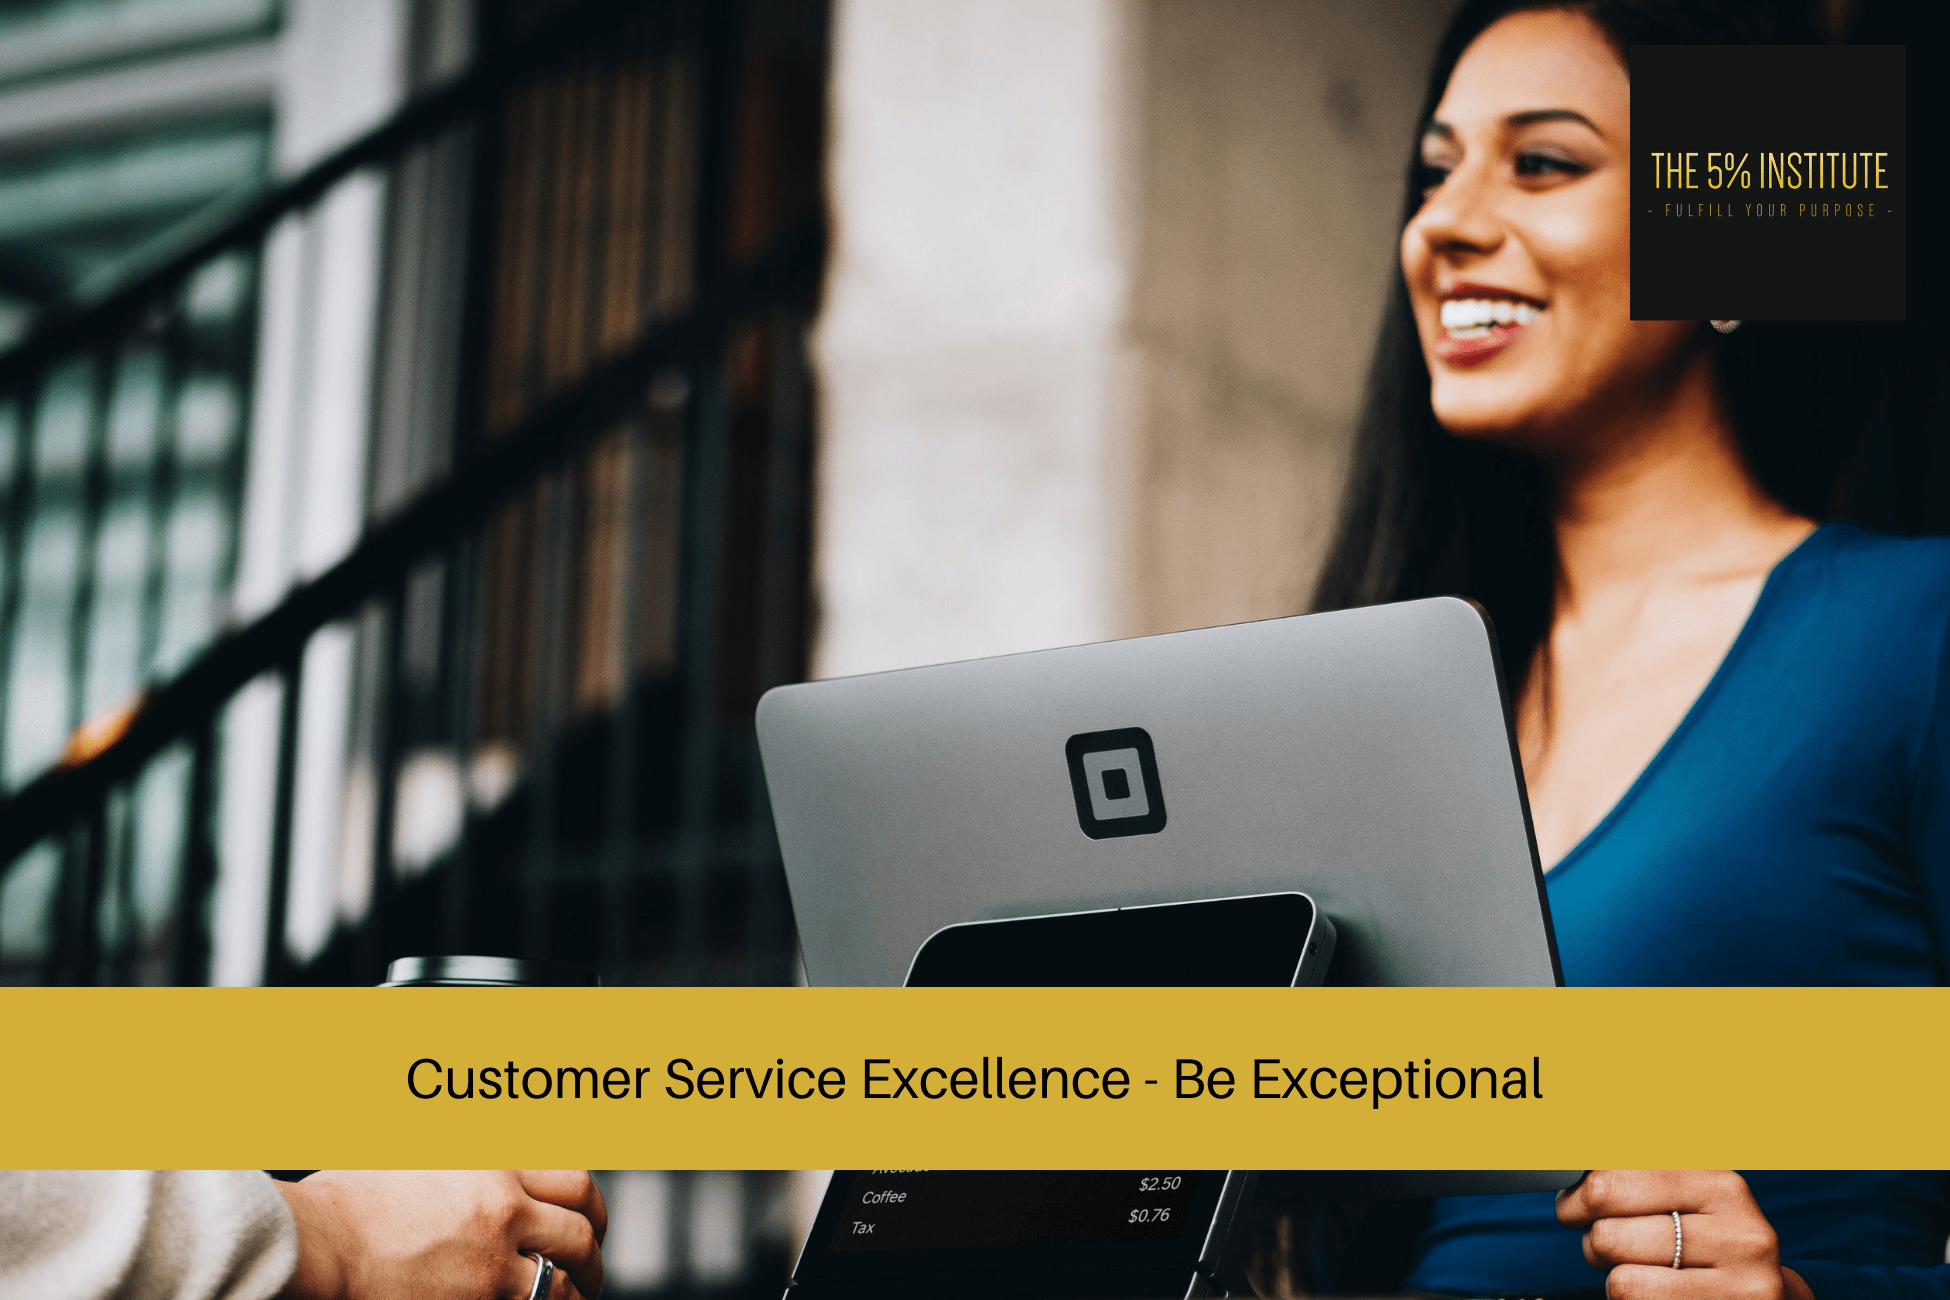 Customer Service Excellence - Be Exceptional